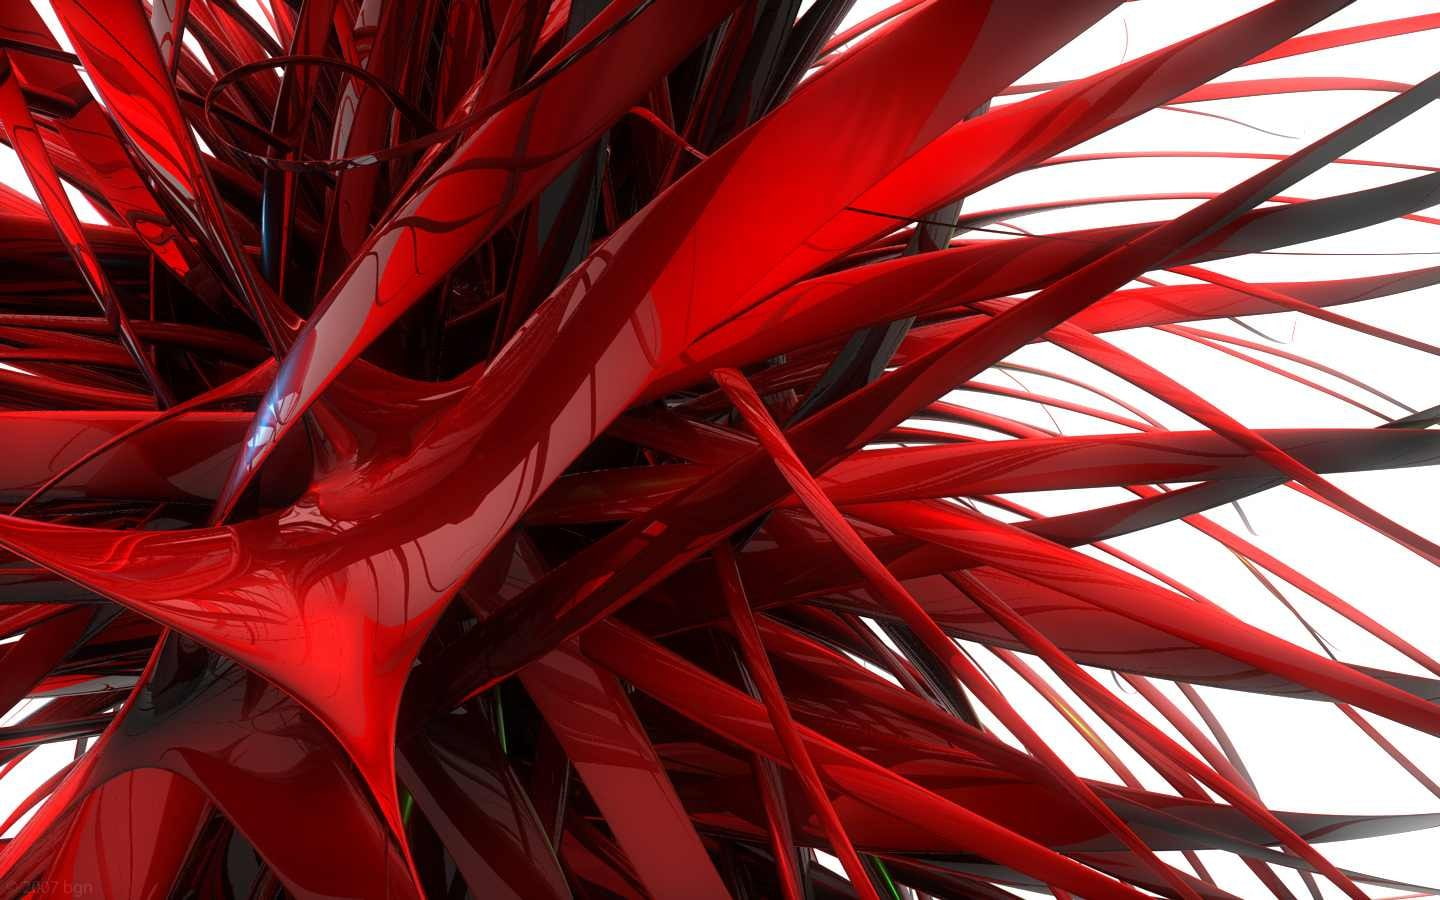 digital art, shapes, render, CGI, abstract, red, backgrounds